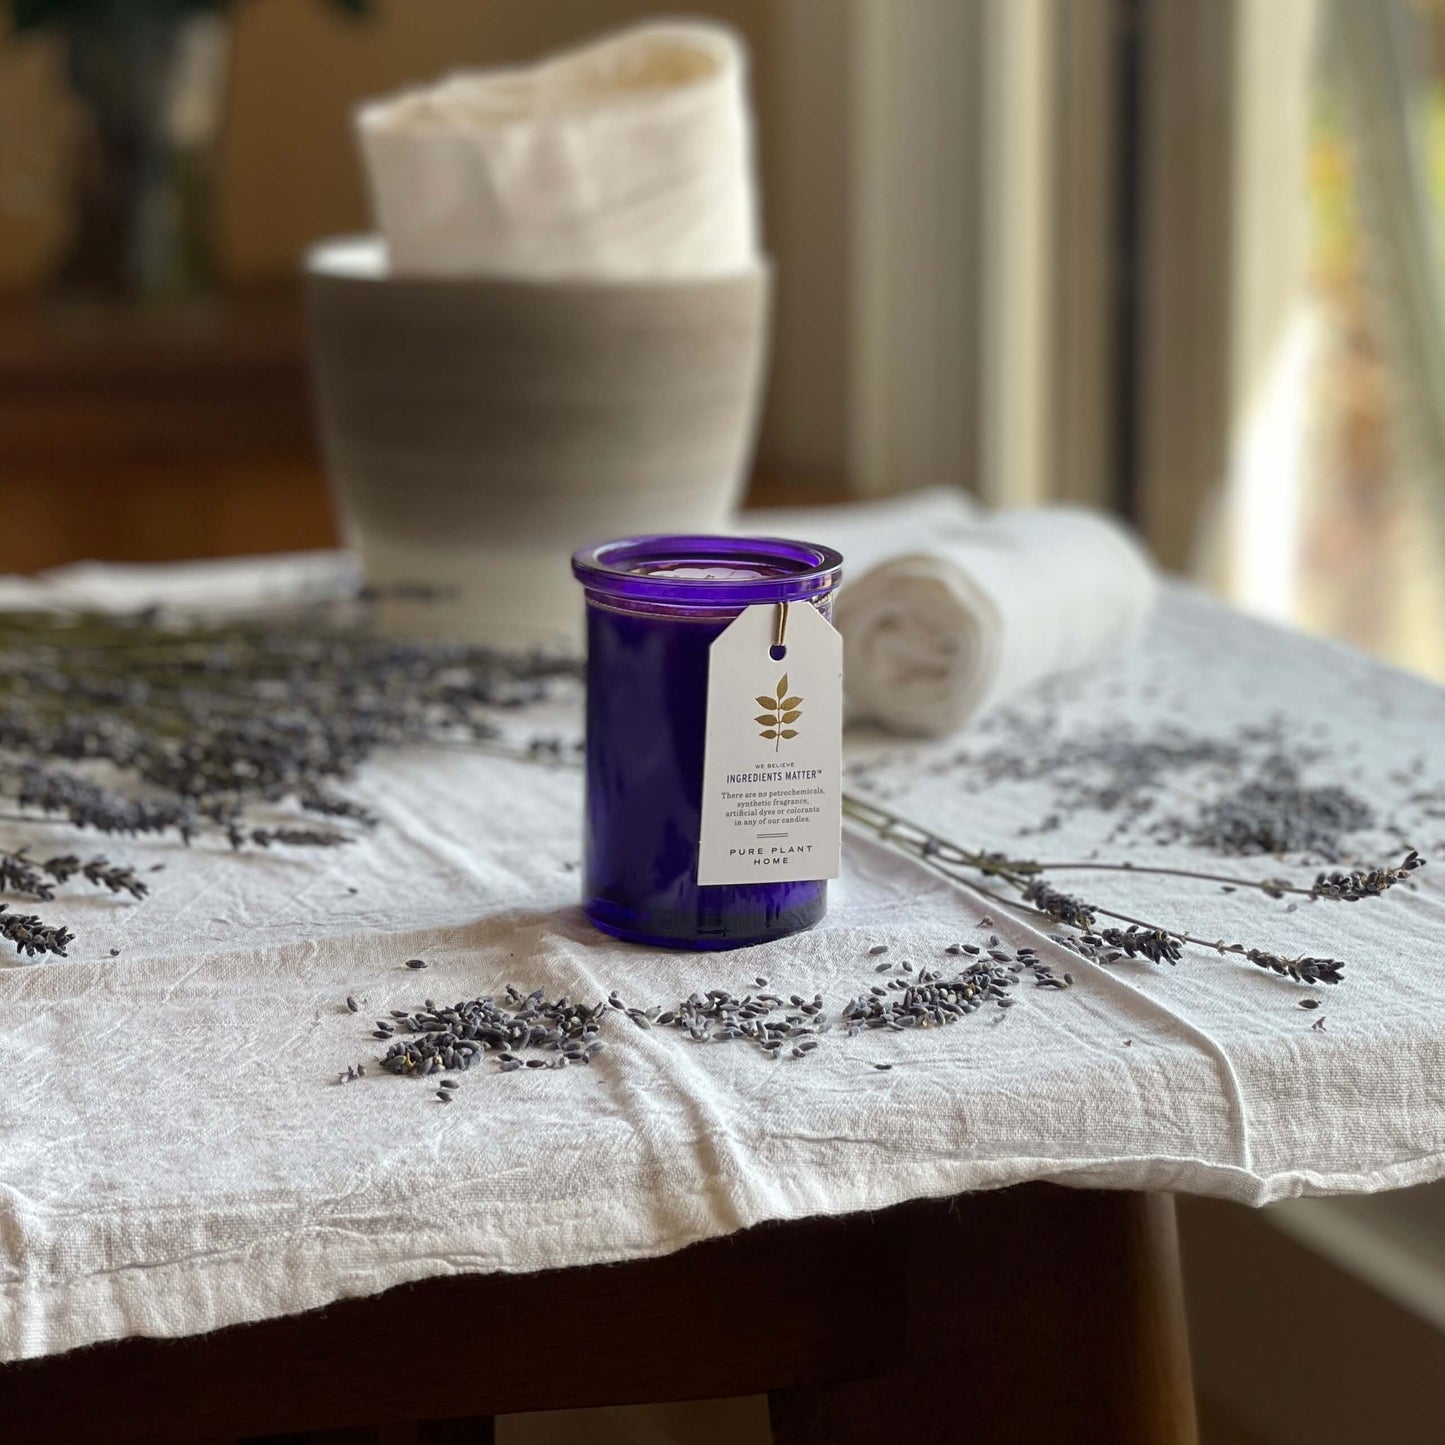 French Lavender Aromatherapy Candle set on a linen cloth with towels and fresh lavender sprigs